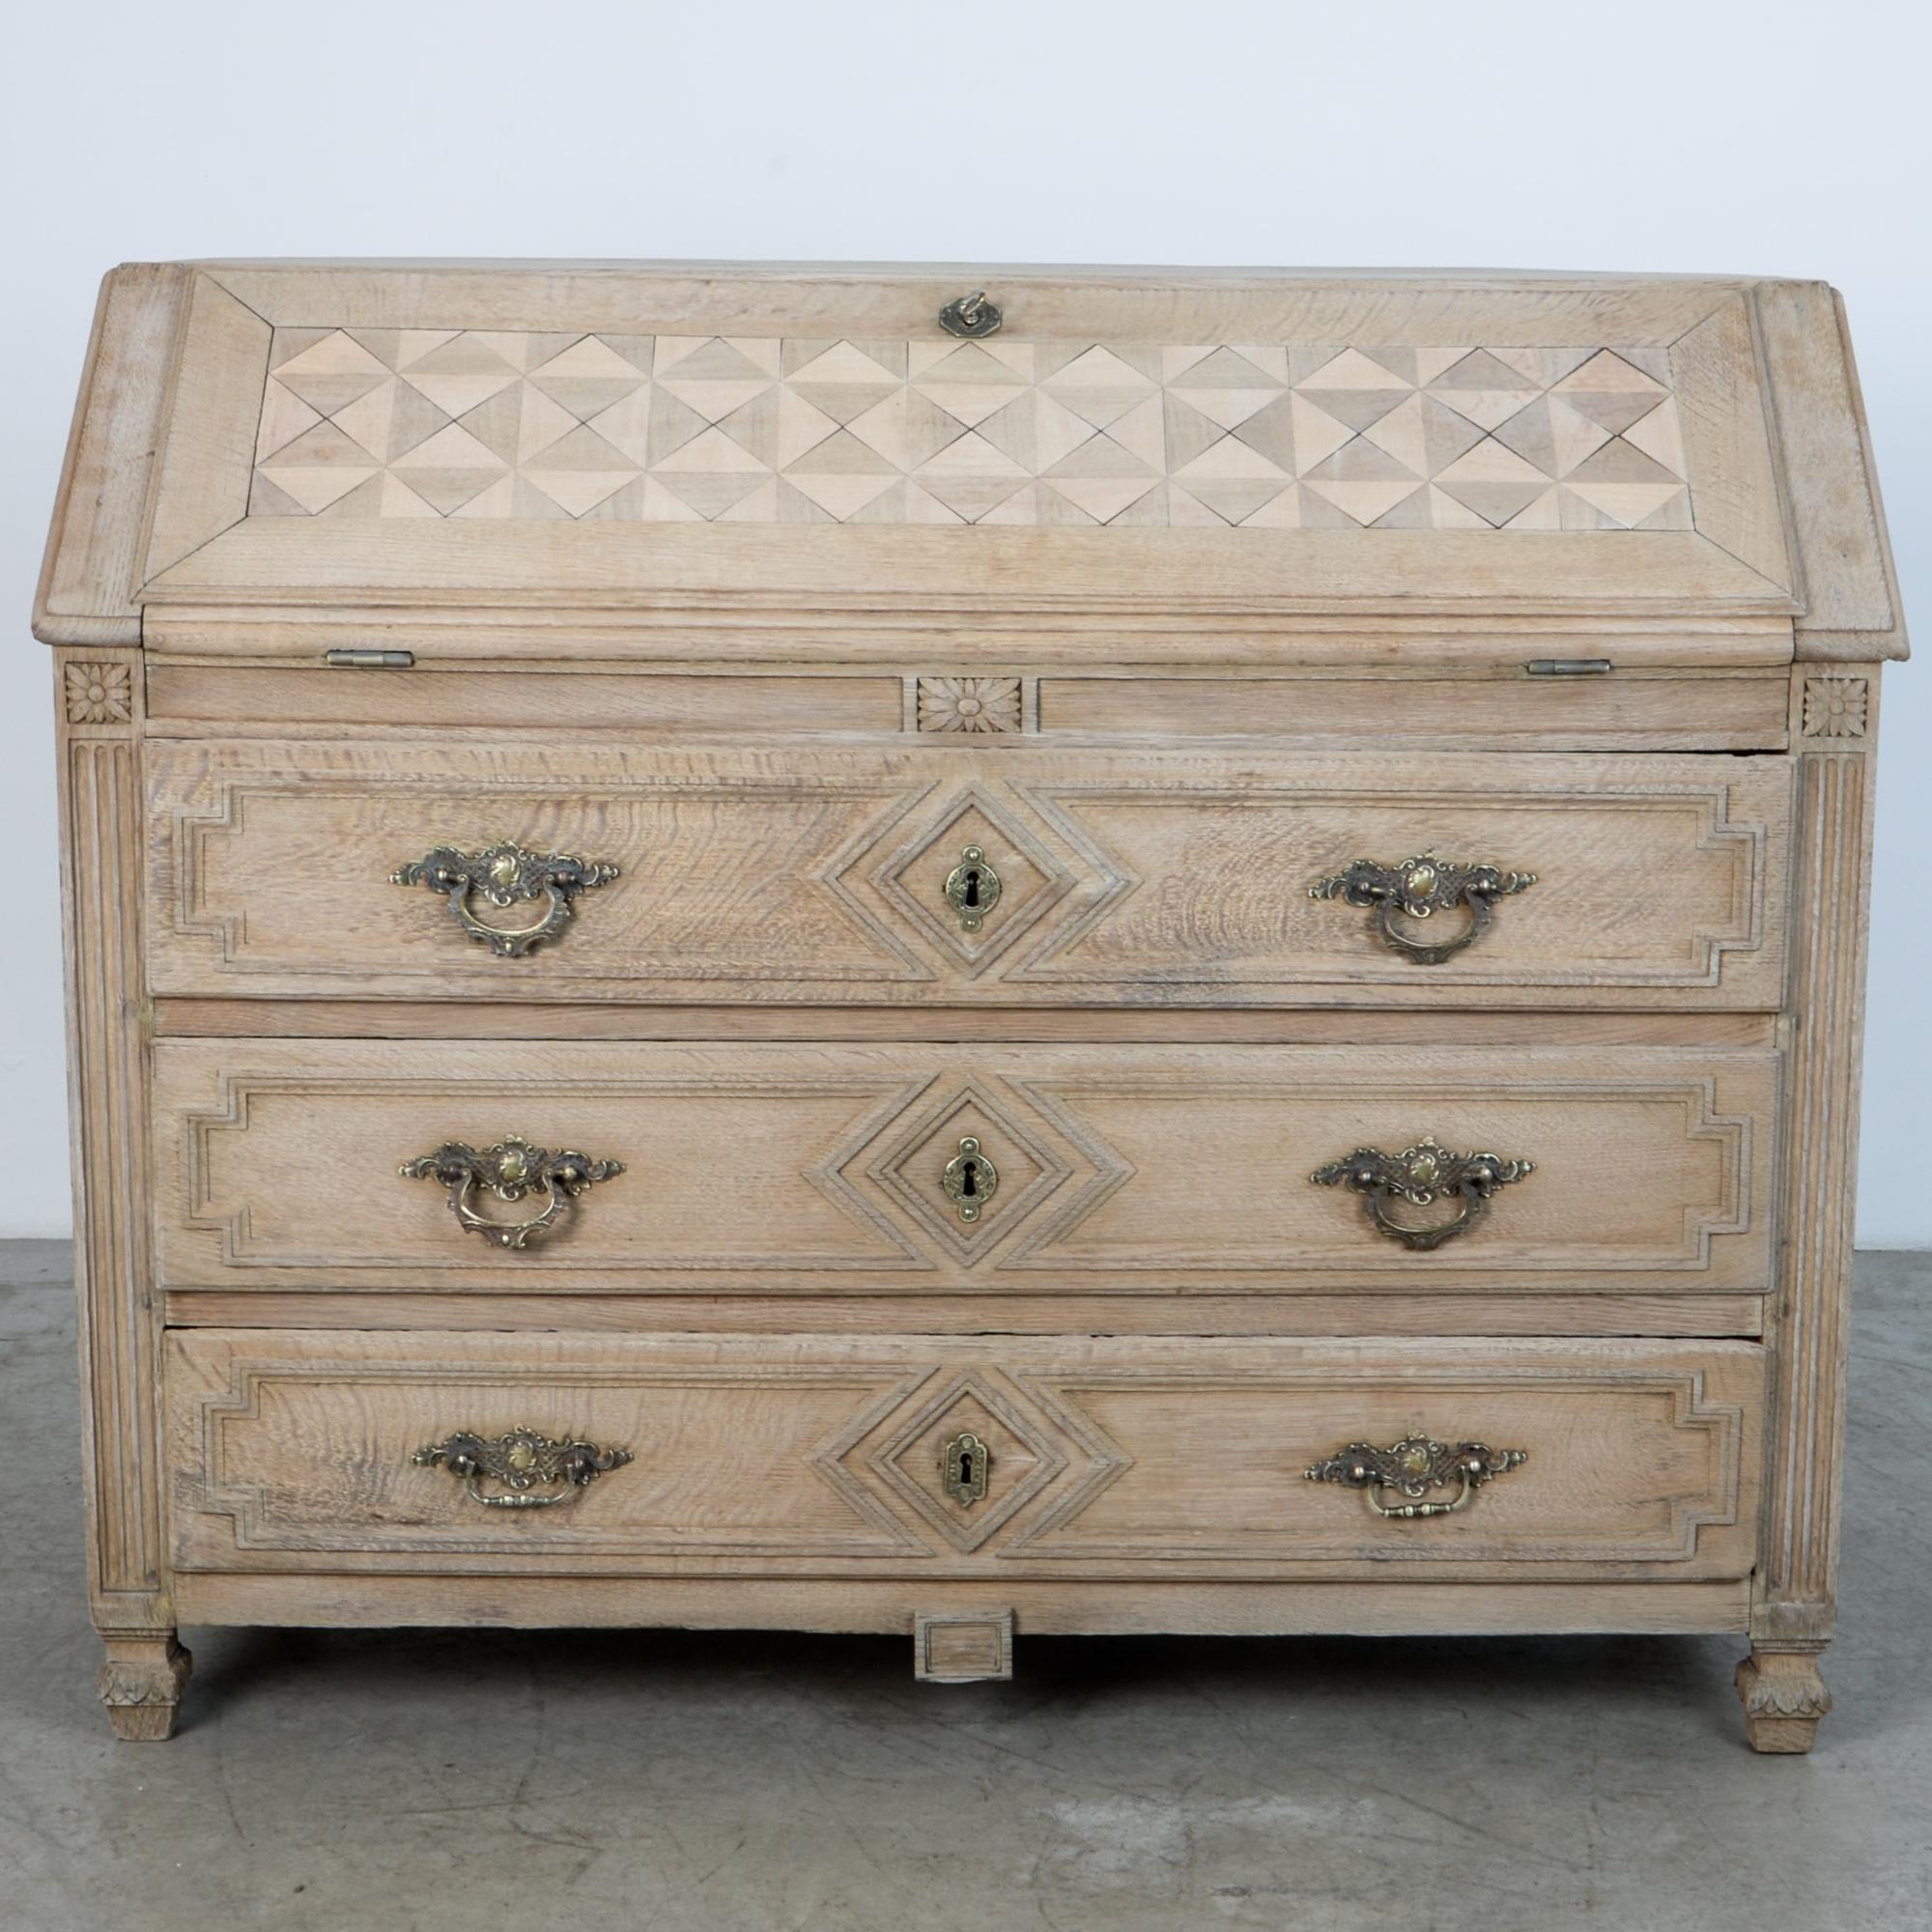 From France, circa 1860, this piece follows the tradition of French Provincial furniture workshops. With a characteristic fusion of styles. A three drawer chest supports an unfordable writing desk, in oak. The desk front panel inset with parquetry